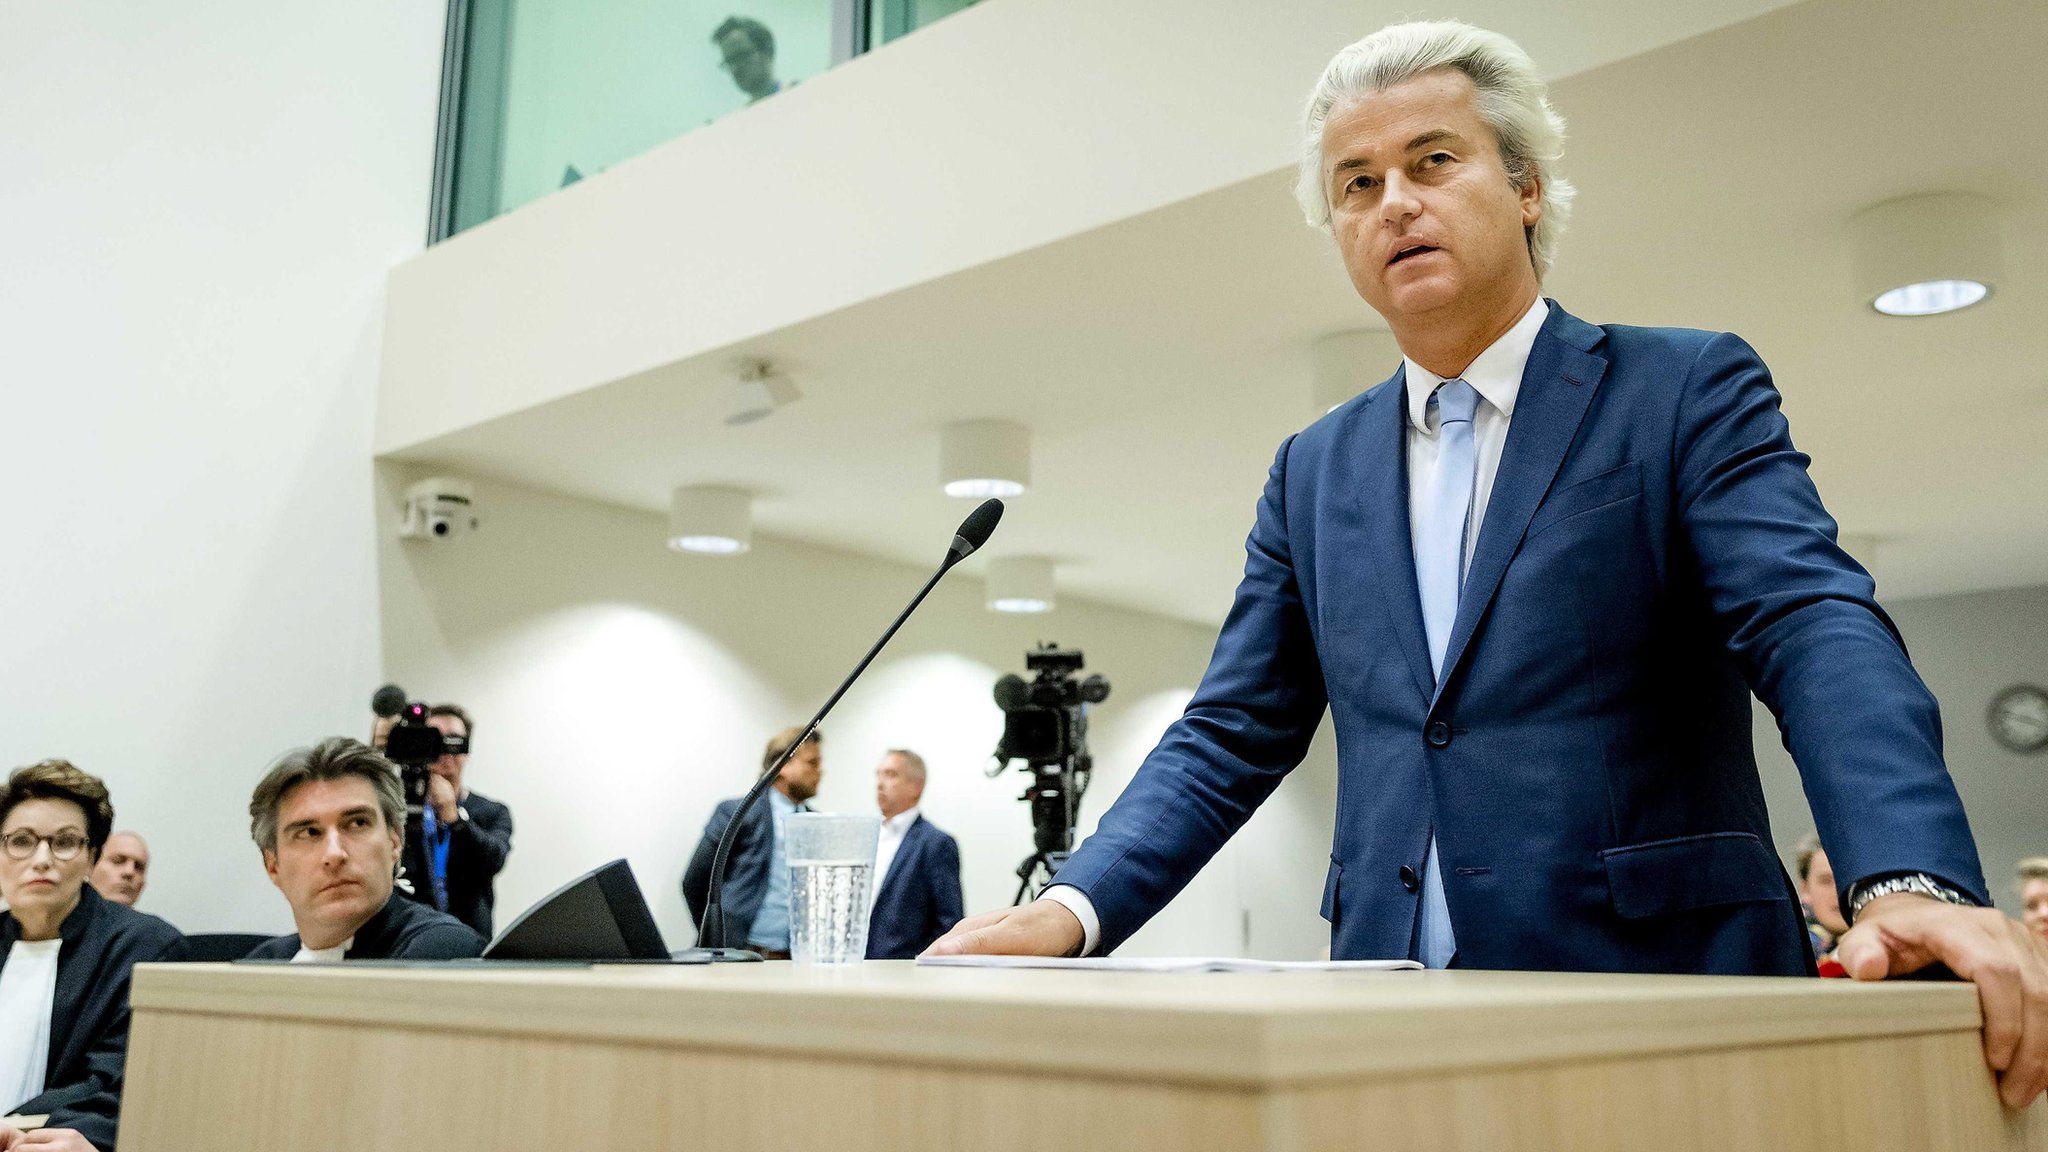 Geert Wilders of the Freedom Party speaks in the court of Schiphol, the Netherlands, 23 November 2016